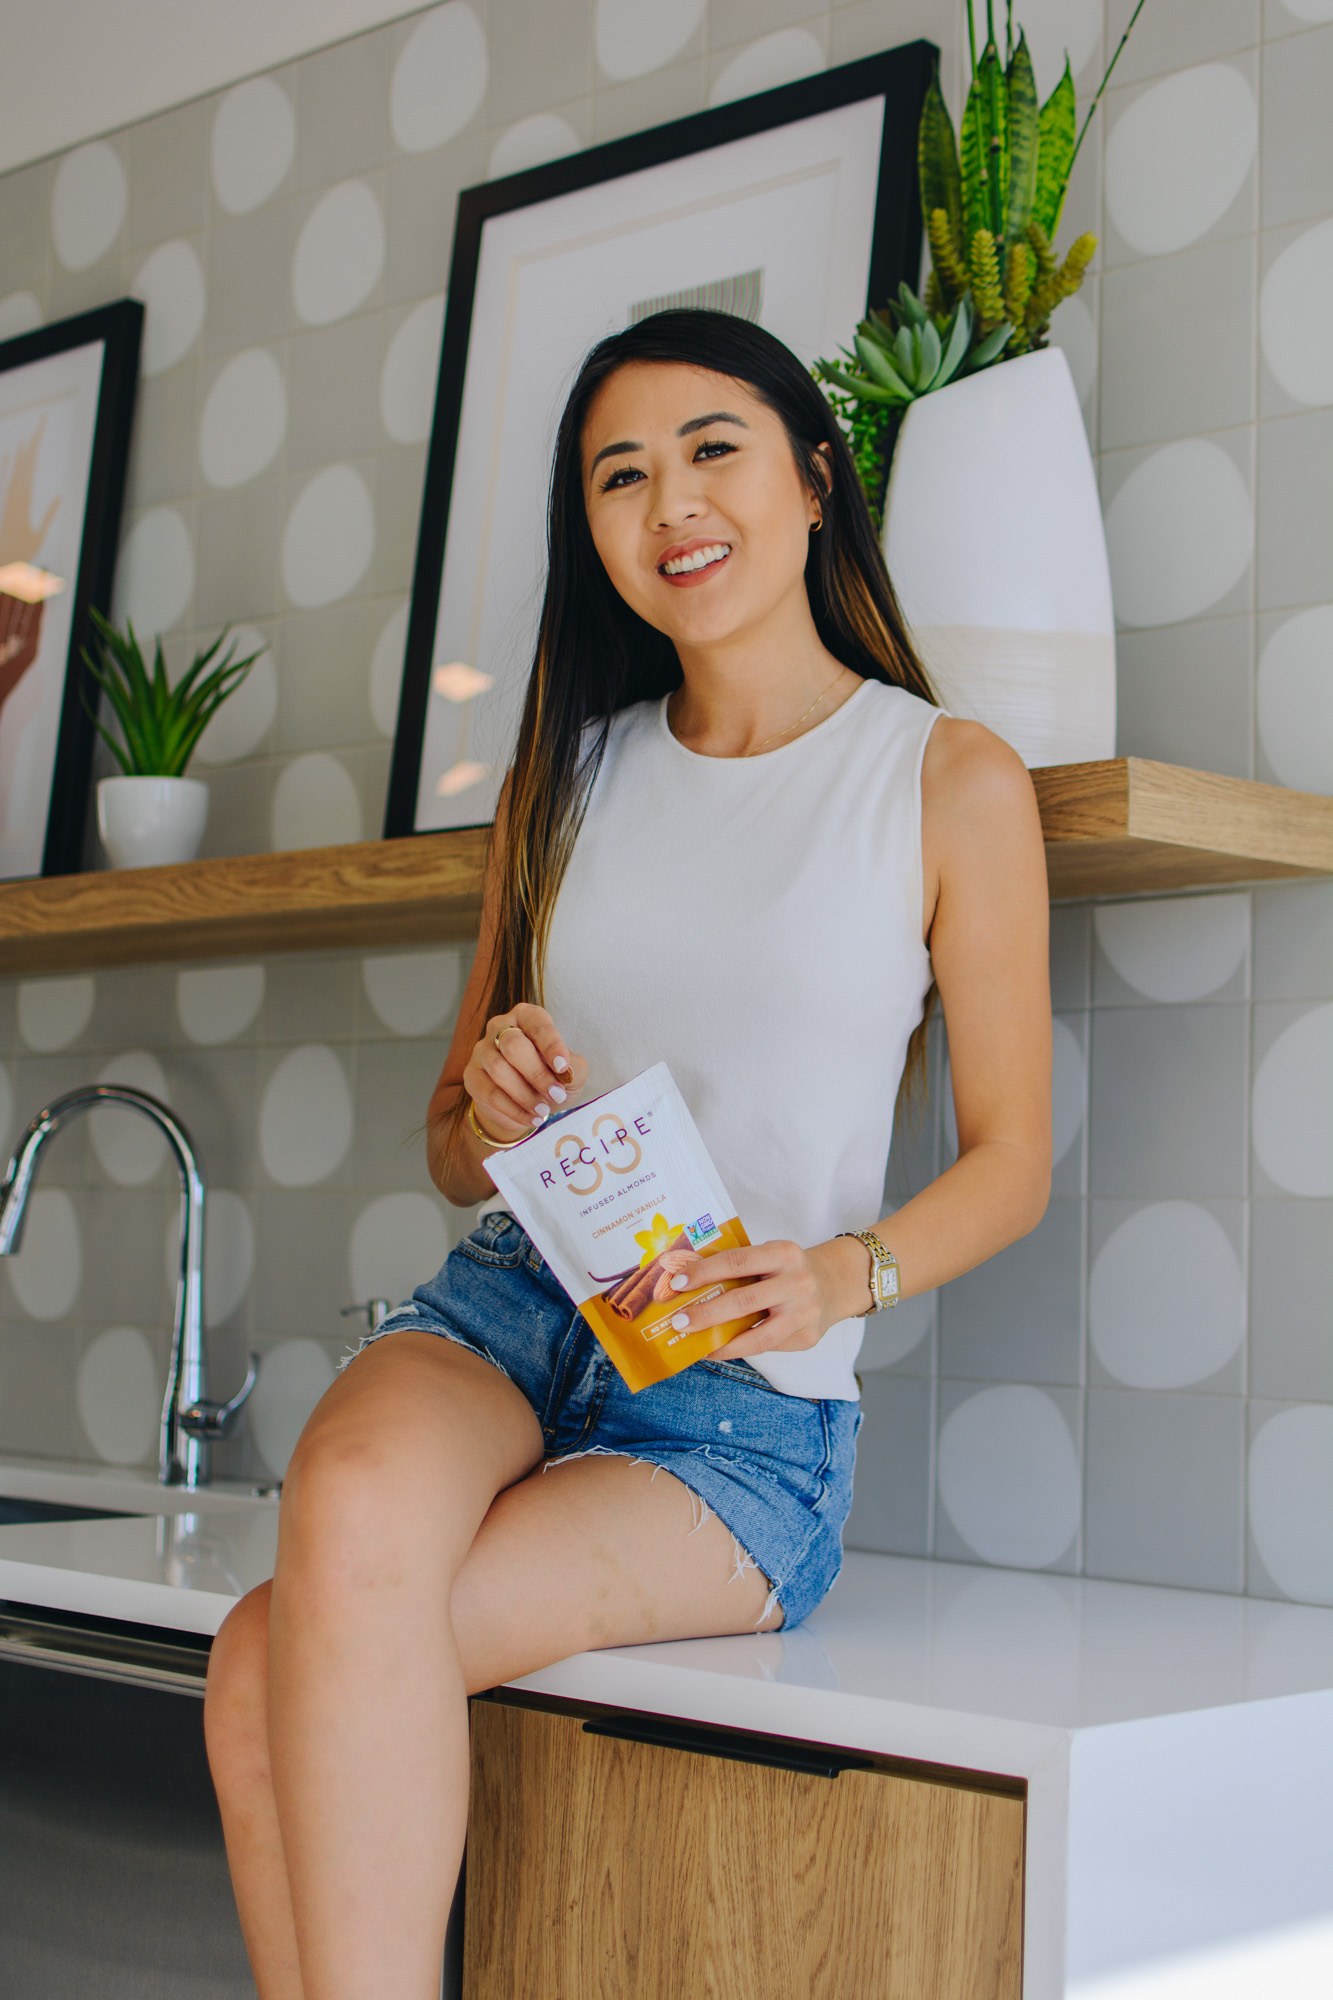 Lifestyle blogger Demi Bang shares mess-free infused almonds snack called Recipe 33 as an easy snack for the summer.